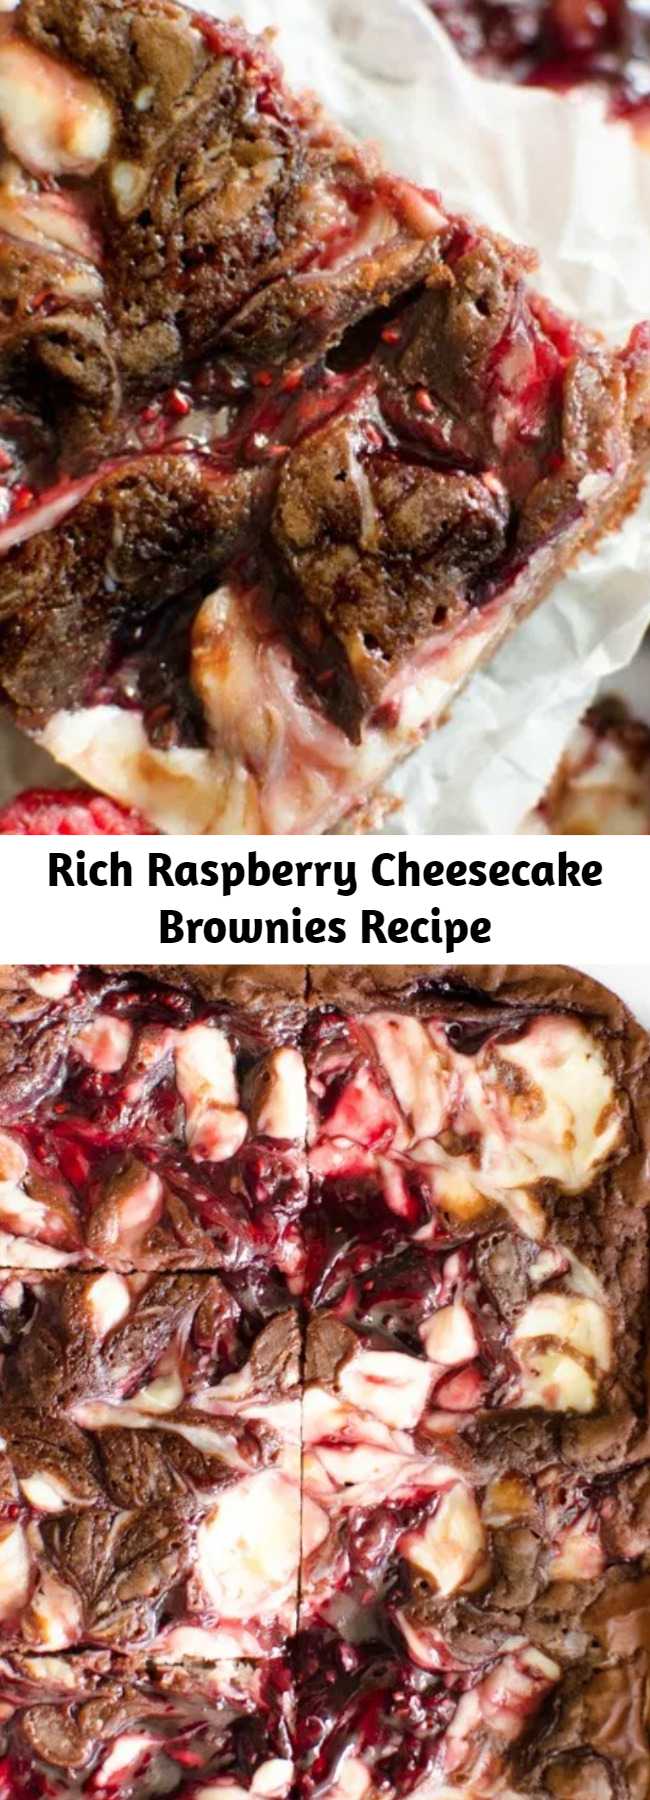 Rich Raspberry Cheesecake Brownies Recipe - Raspberry Cheesecake Brownies are decedent 5 ingredient brownies with a raspberry cheesecake swirl. Quick & easy raspberry cheesecake brownie recipe that looks and tastes incredible!